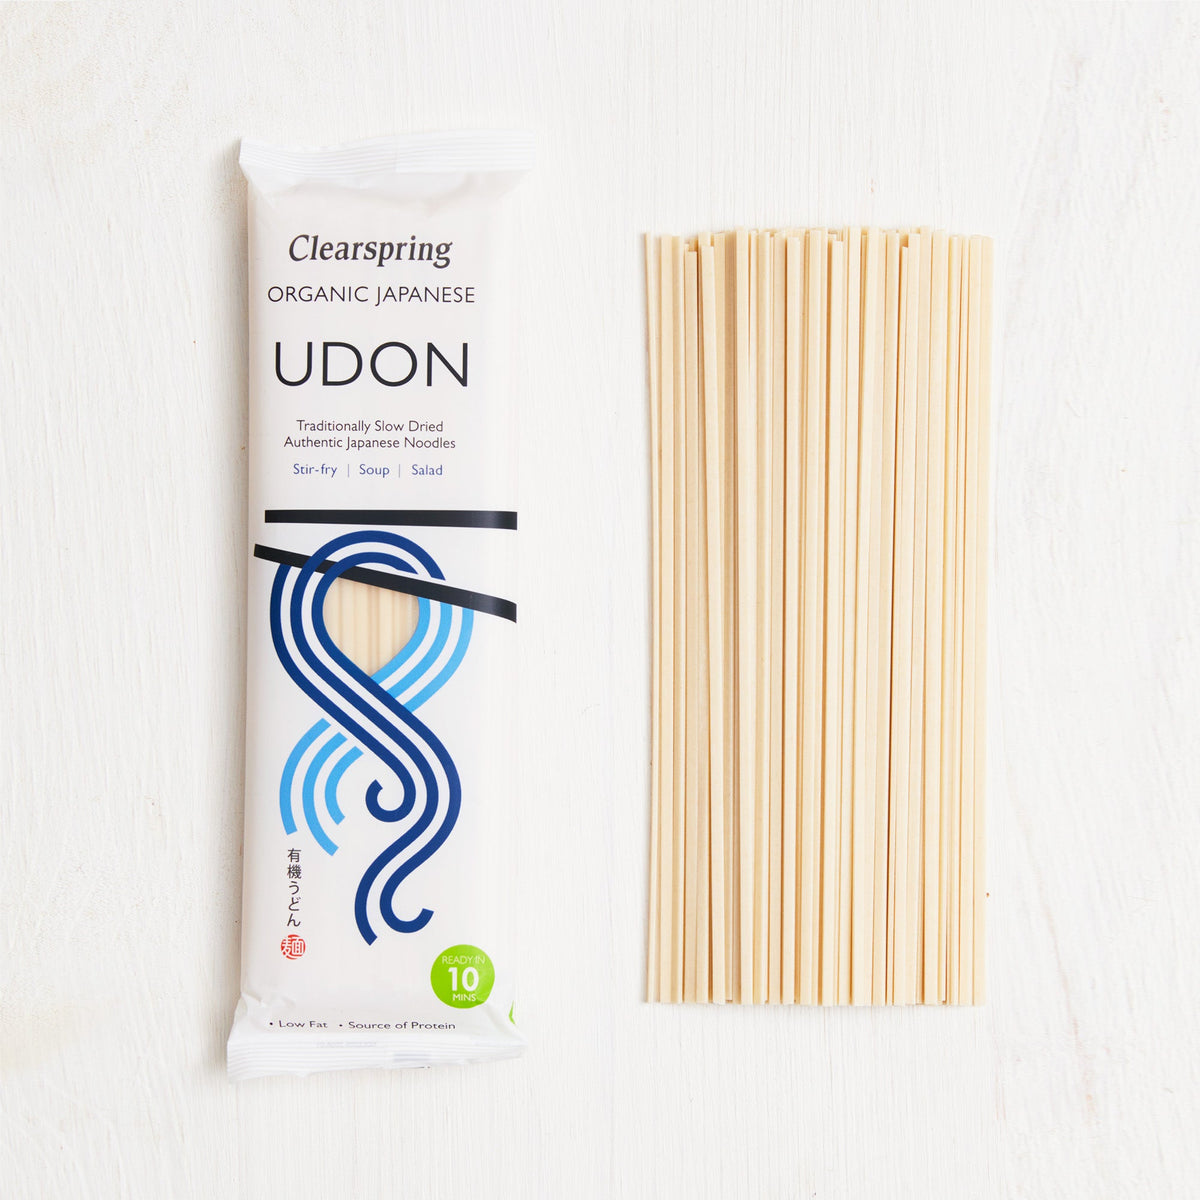 Clearspring Organic Japanese Udon Noodles (12 Pack)